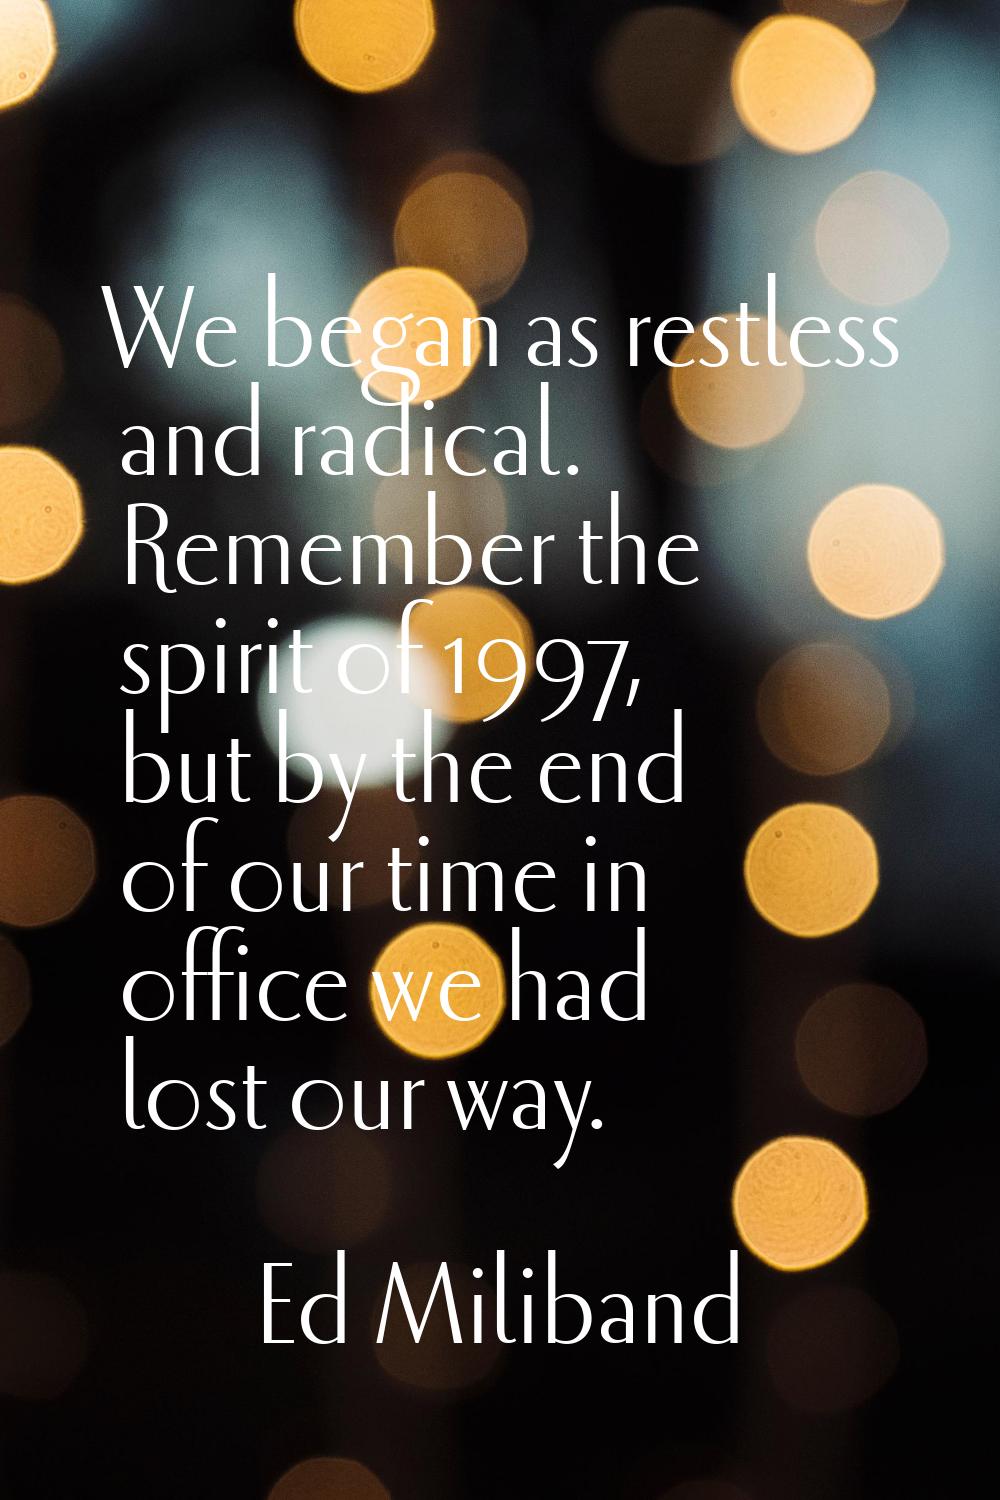 We began as restless and radical. Remember the spirit of 1997, but by the end of our time in office